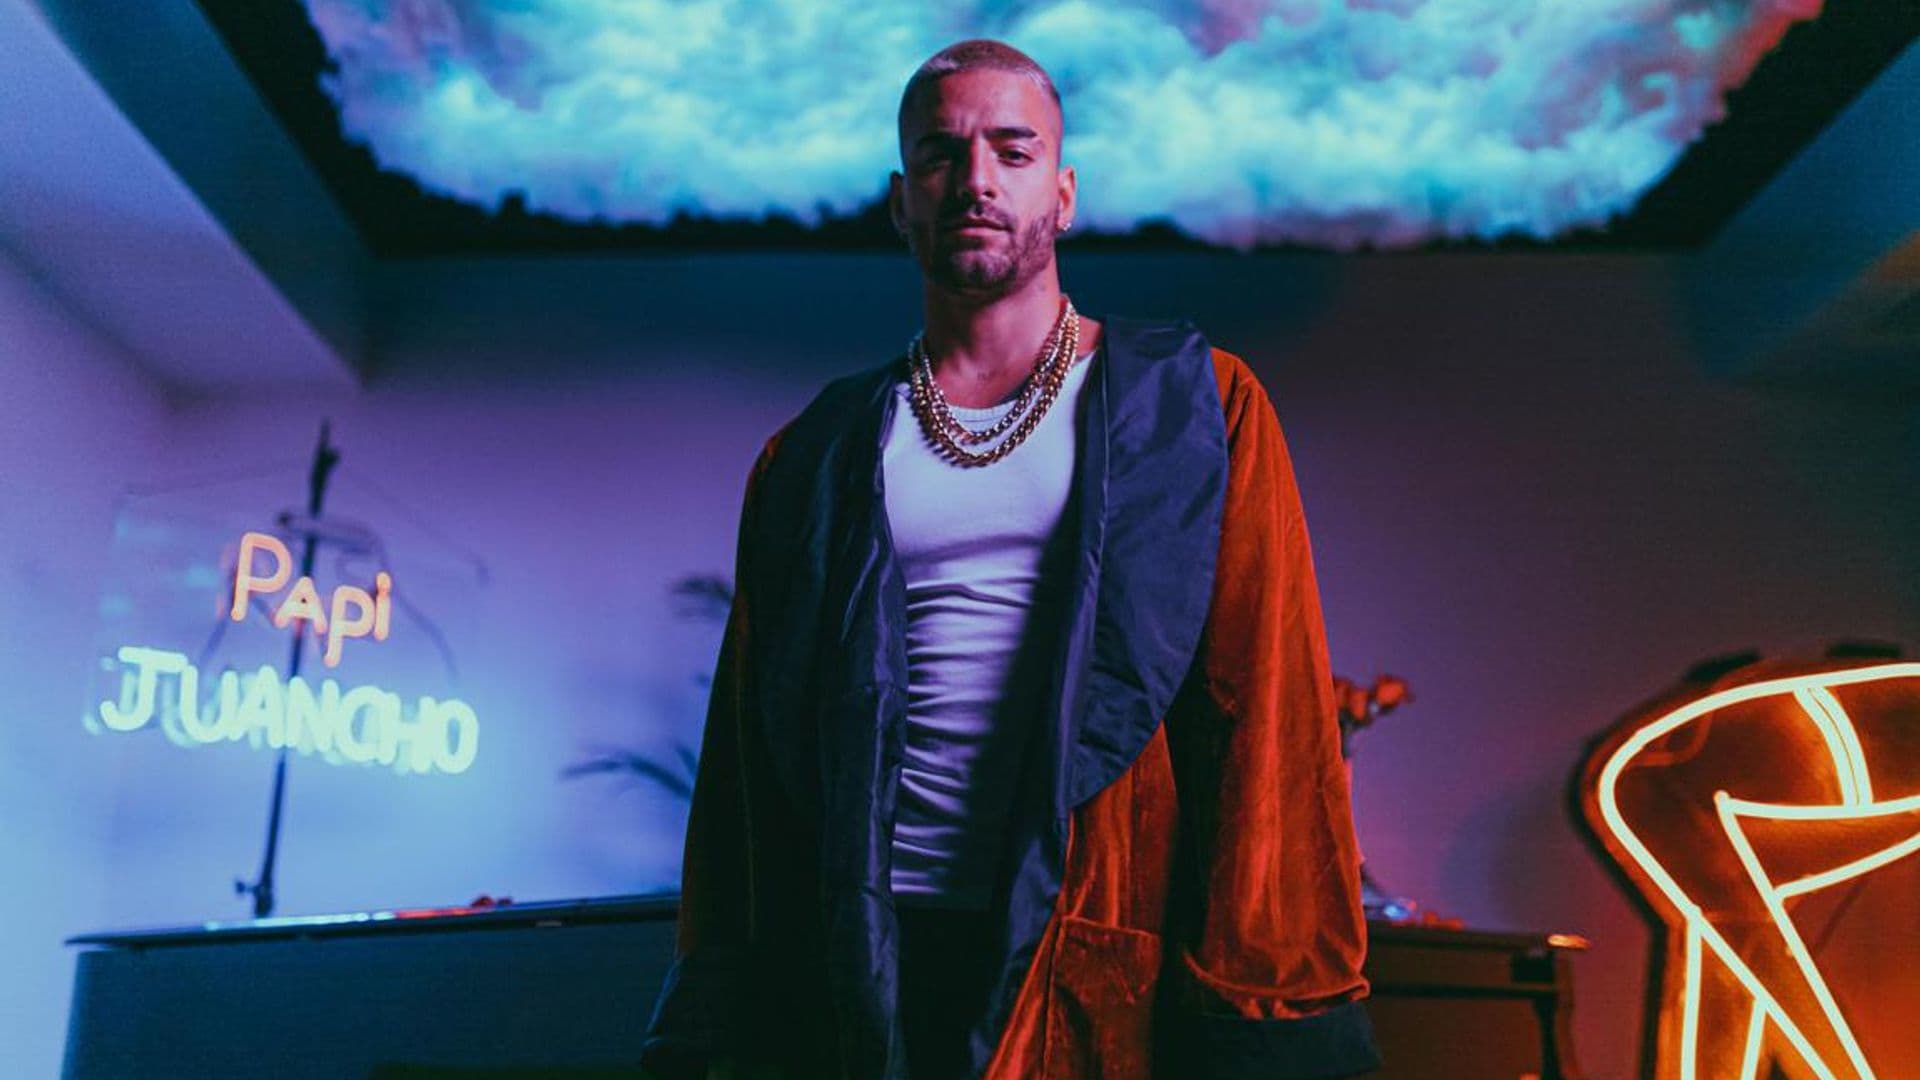 EXCLUSIVE: Maluma launches exciting project in honor of newly released album ‘Papi Juancho’